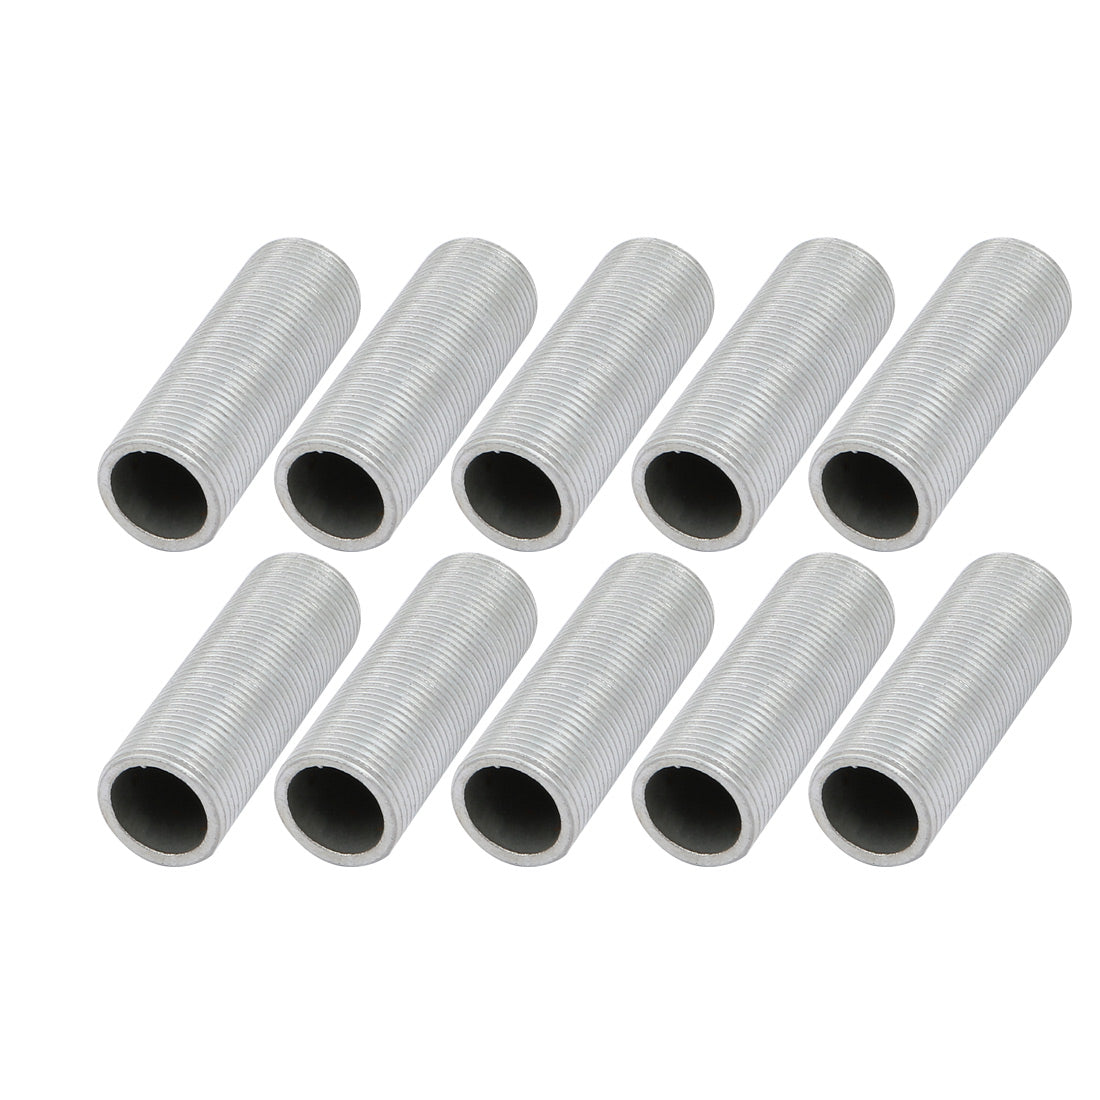 uxcell Uxcell 10 Pcs Metric M14 1mm Pitch Thread Zinc Plated Pipe Nipple Lamp Parts 40mm Long